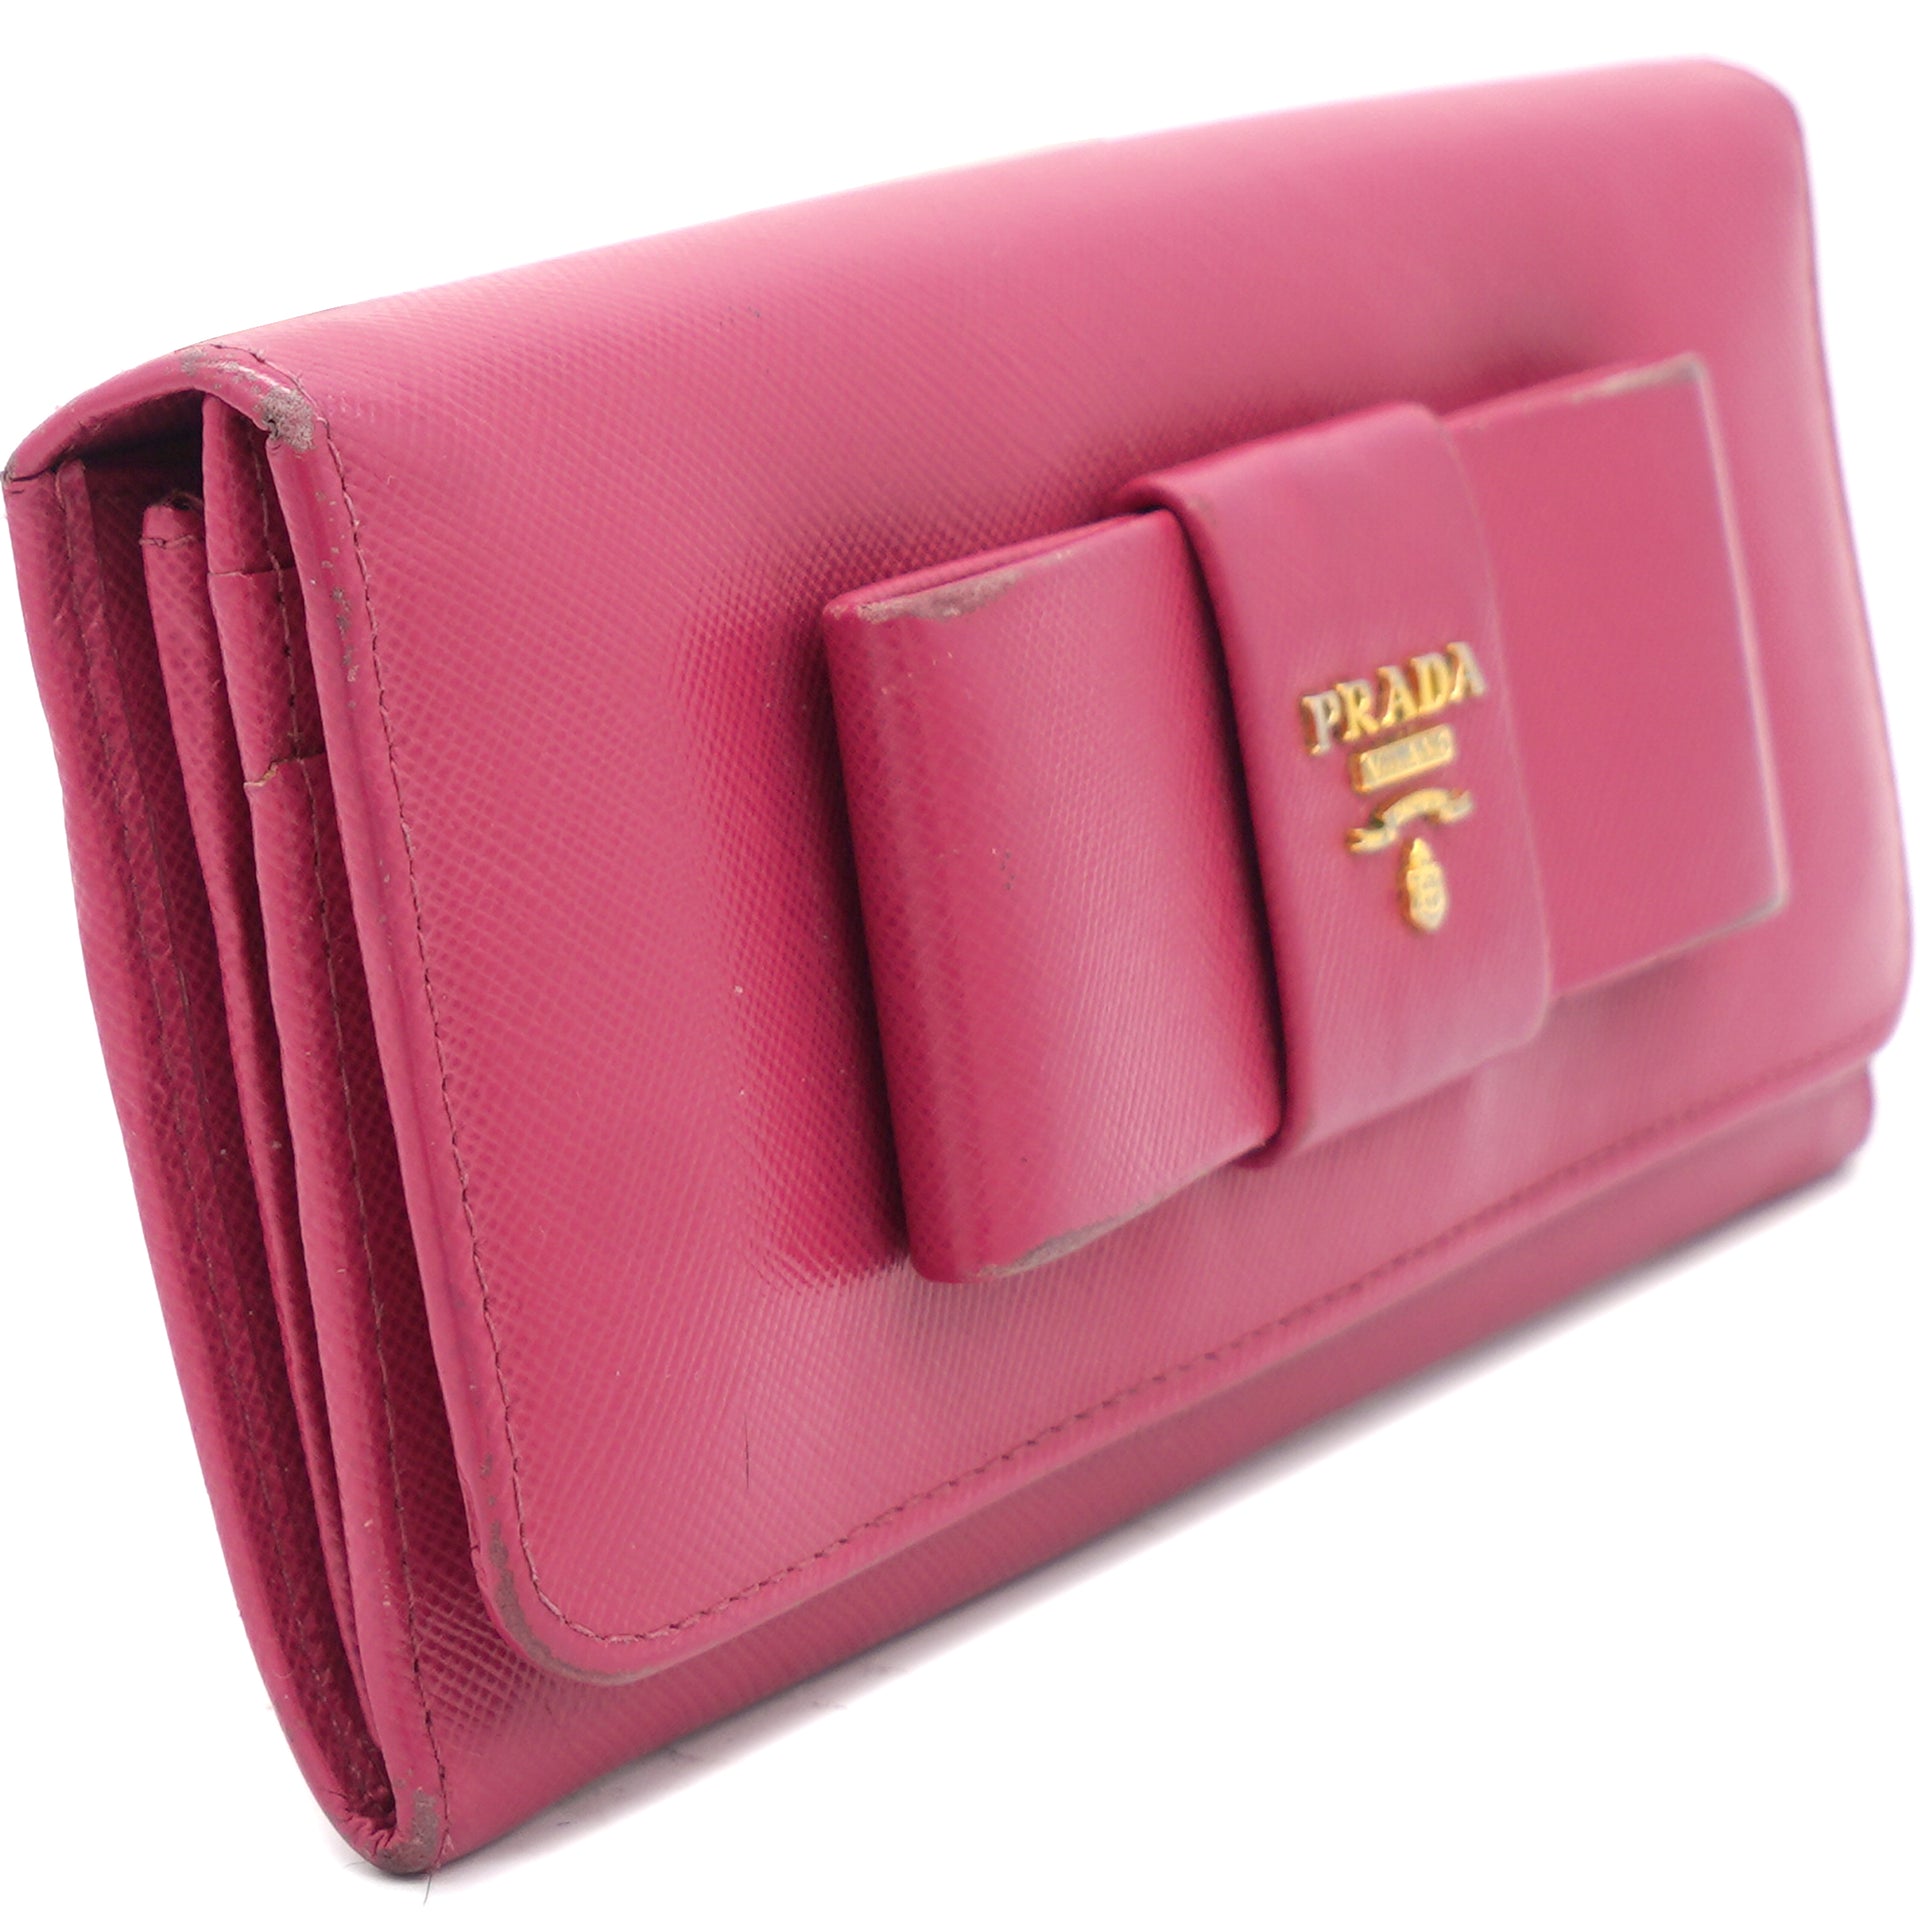 Prada Saffiano Wallet on a Chain, Pink (Peonia)